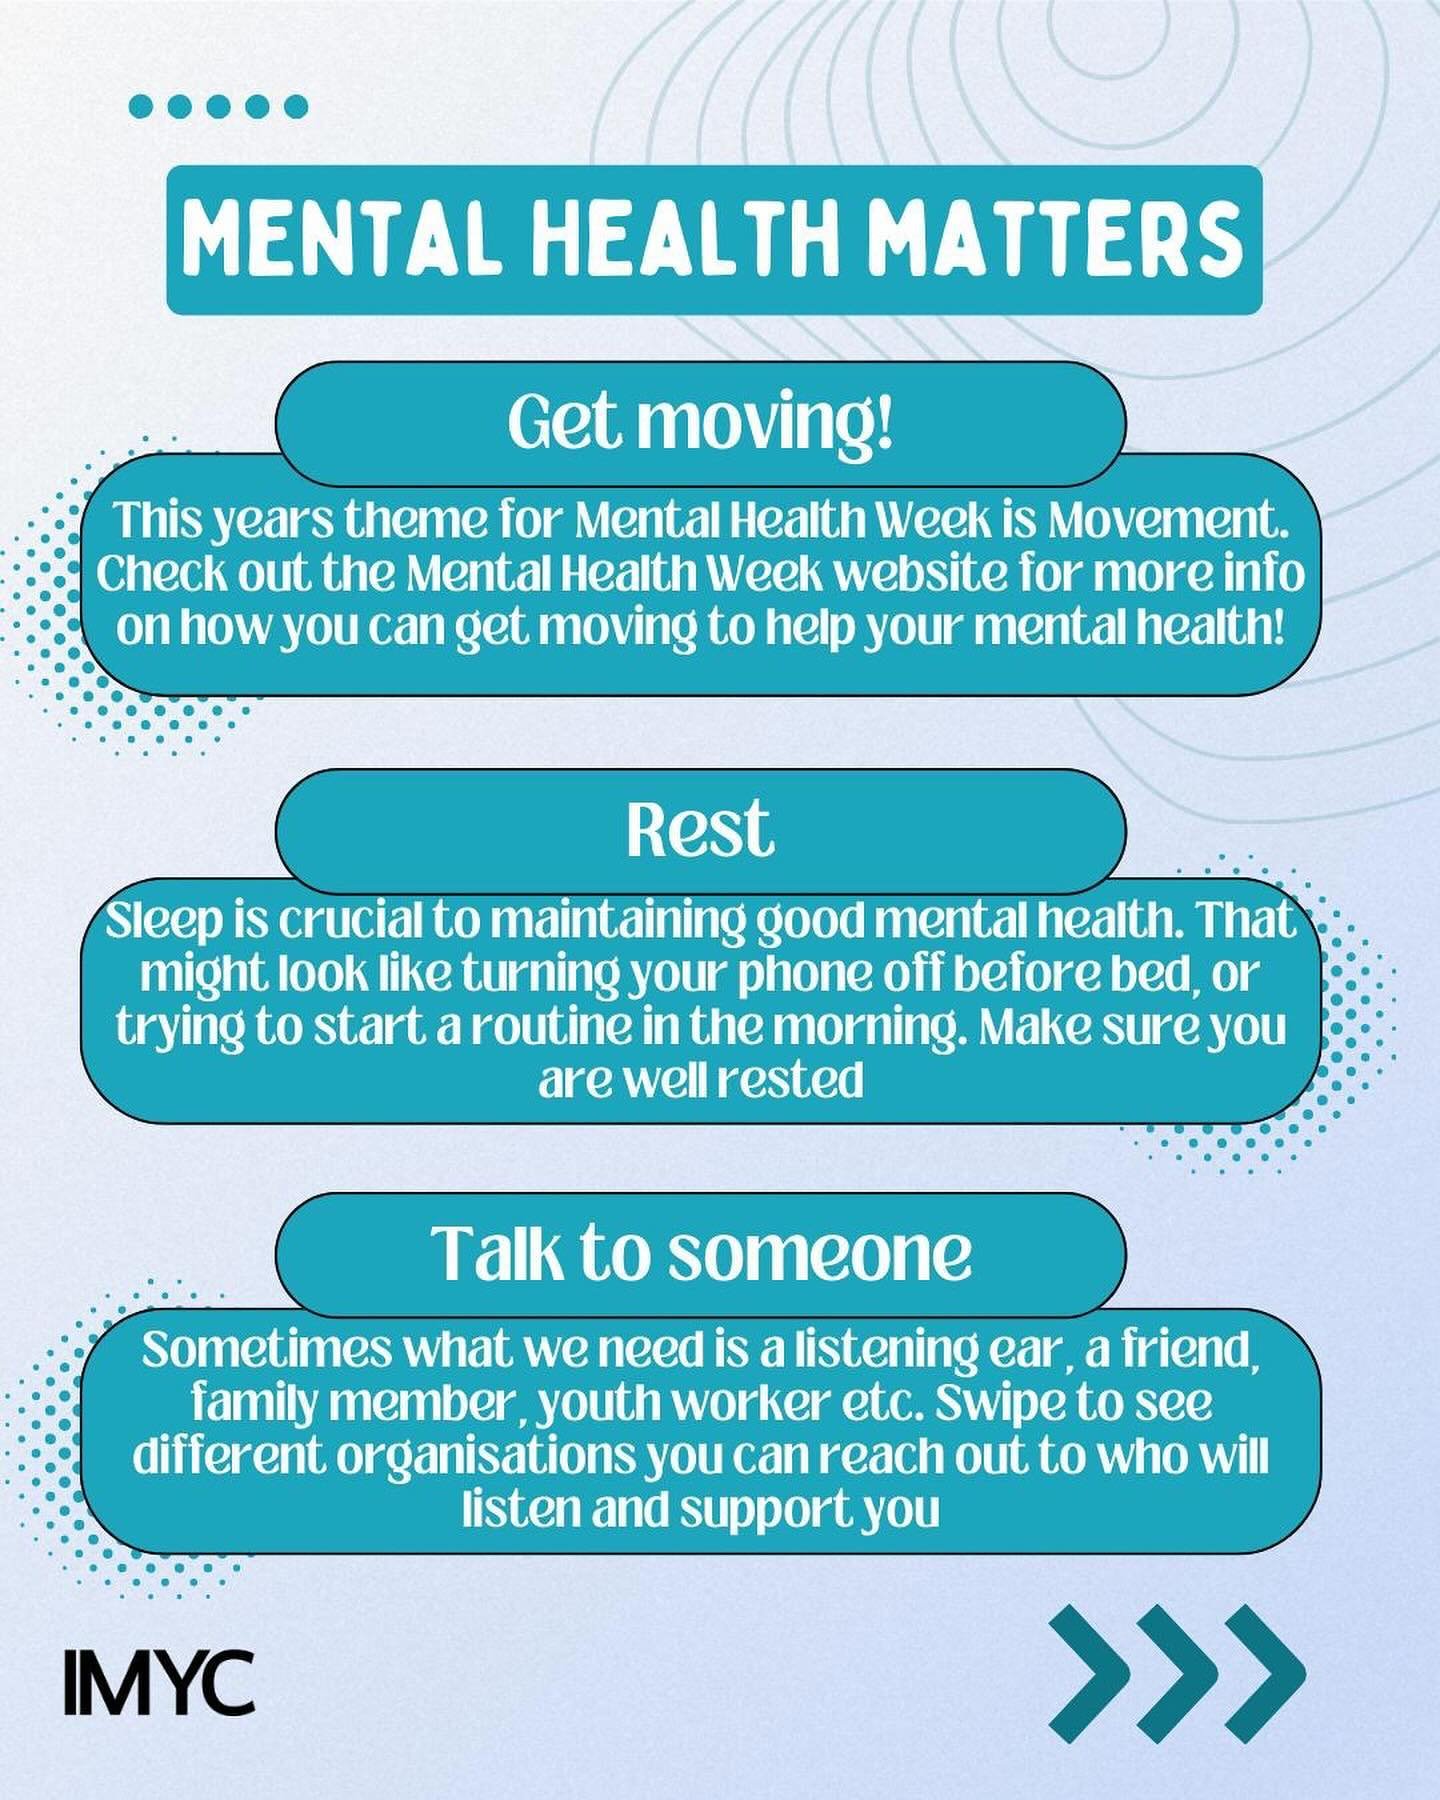 This week is Mental Health Awareness Week

Mental Health is so important, and God knows that too. Sometimes it&rsquo;s good, and sometimes it isn&rsquo;t.

If you, or someone you know, is struggling with their mental health, know that you are not alo